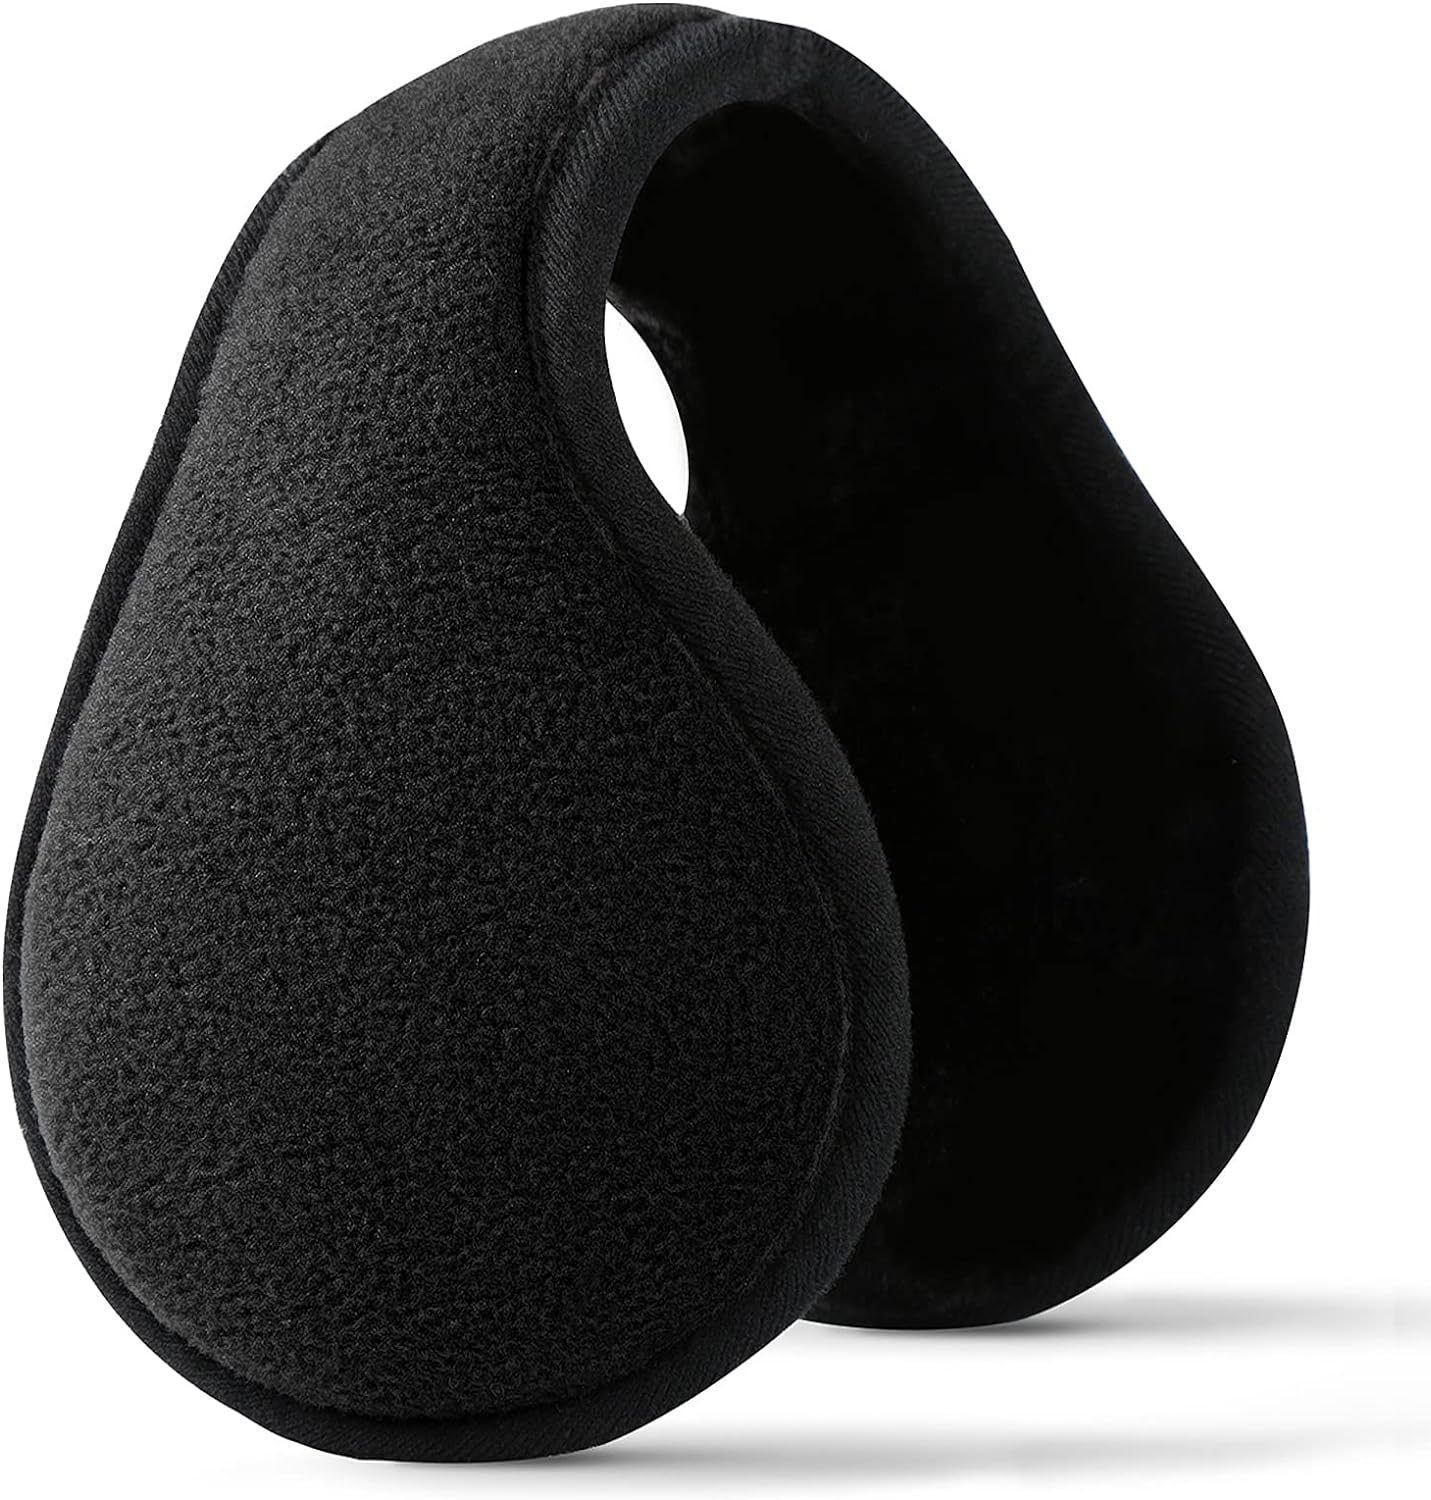 Limited-Time Promo! Don't Miss Out on GERGELLA Ear Muffs For Winter - Save 46%! Act Fast!